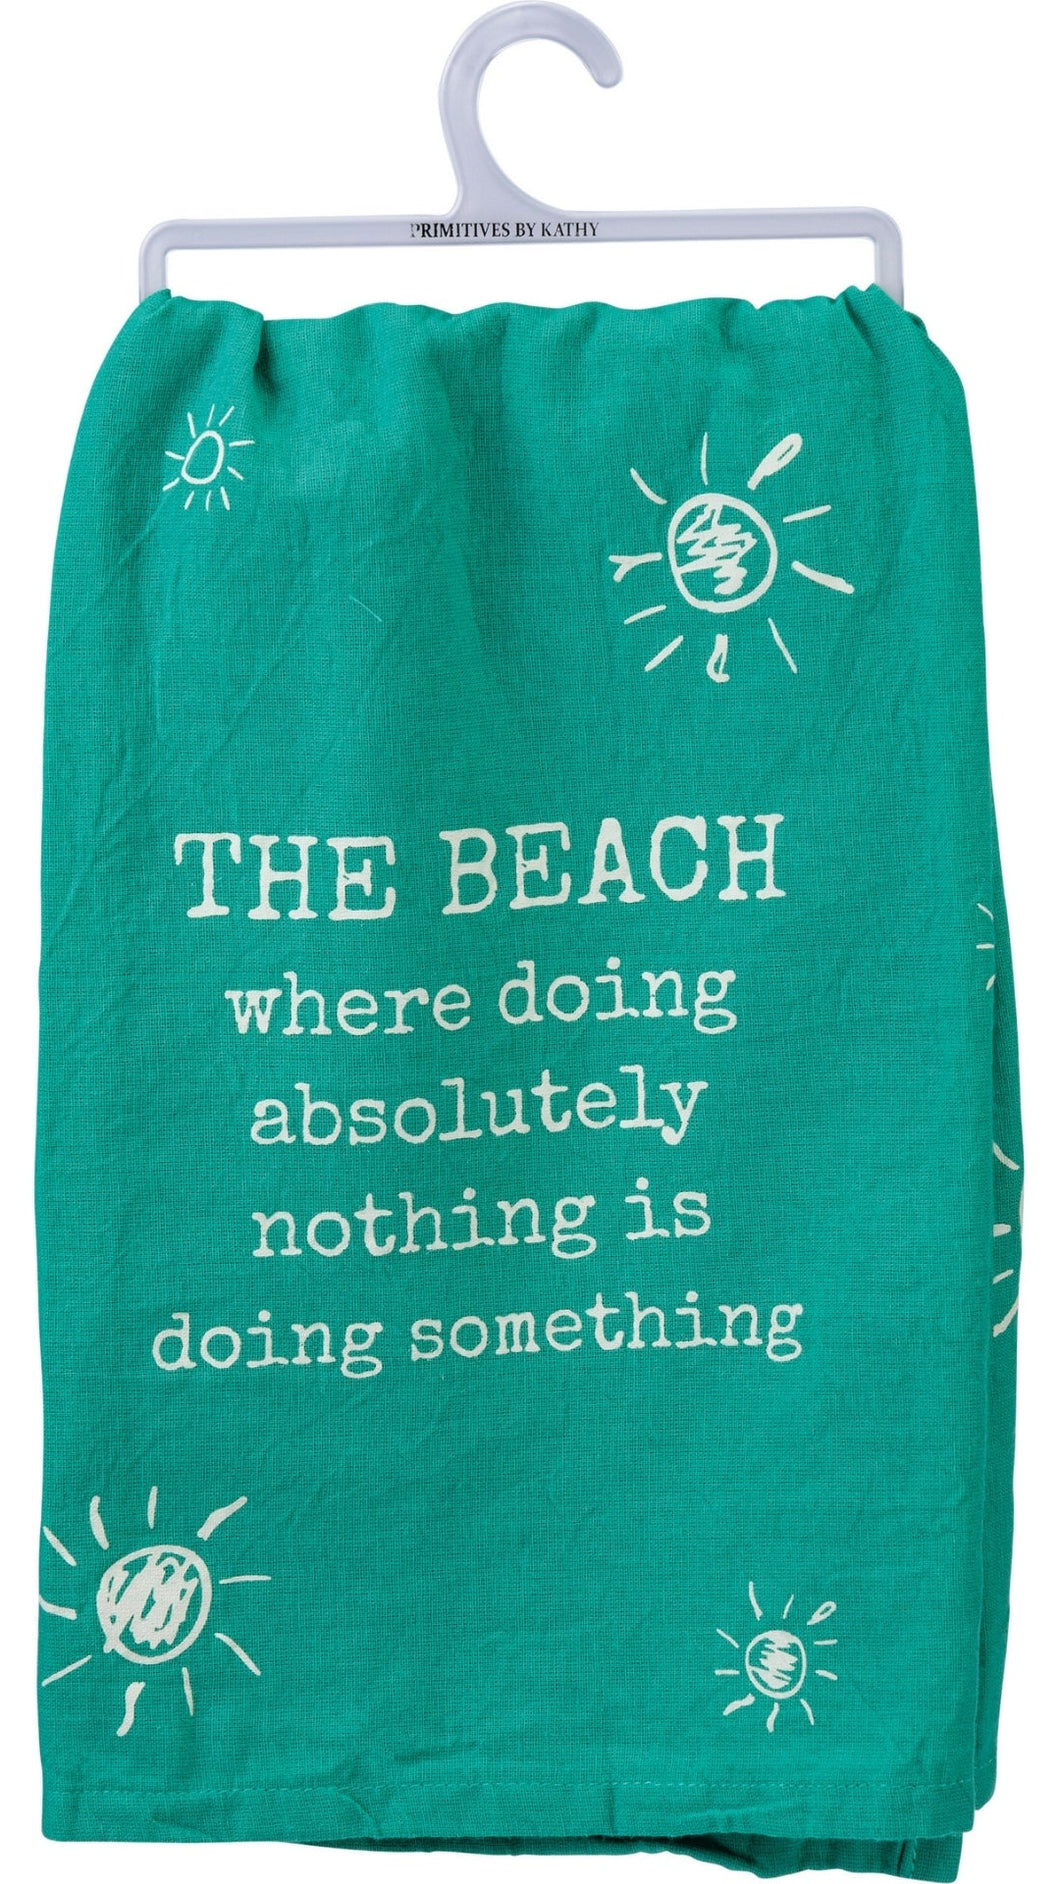 Doing Nothing is Something at the Beach Tea Towel